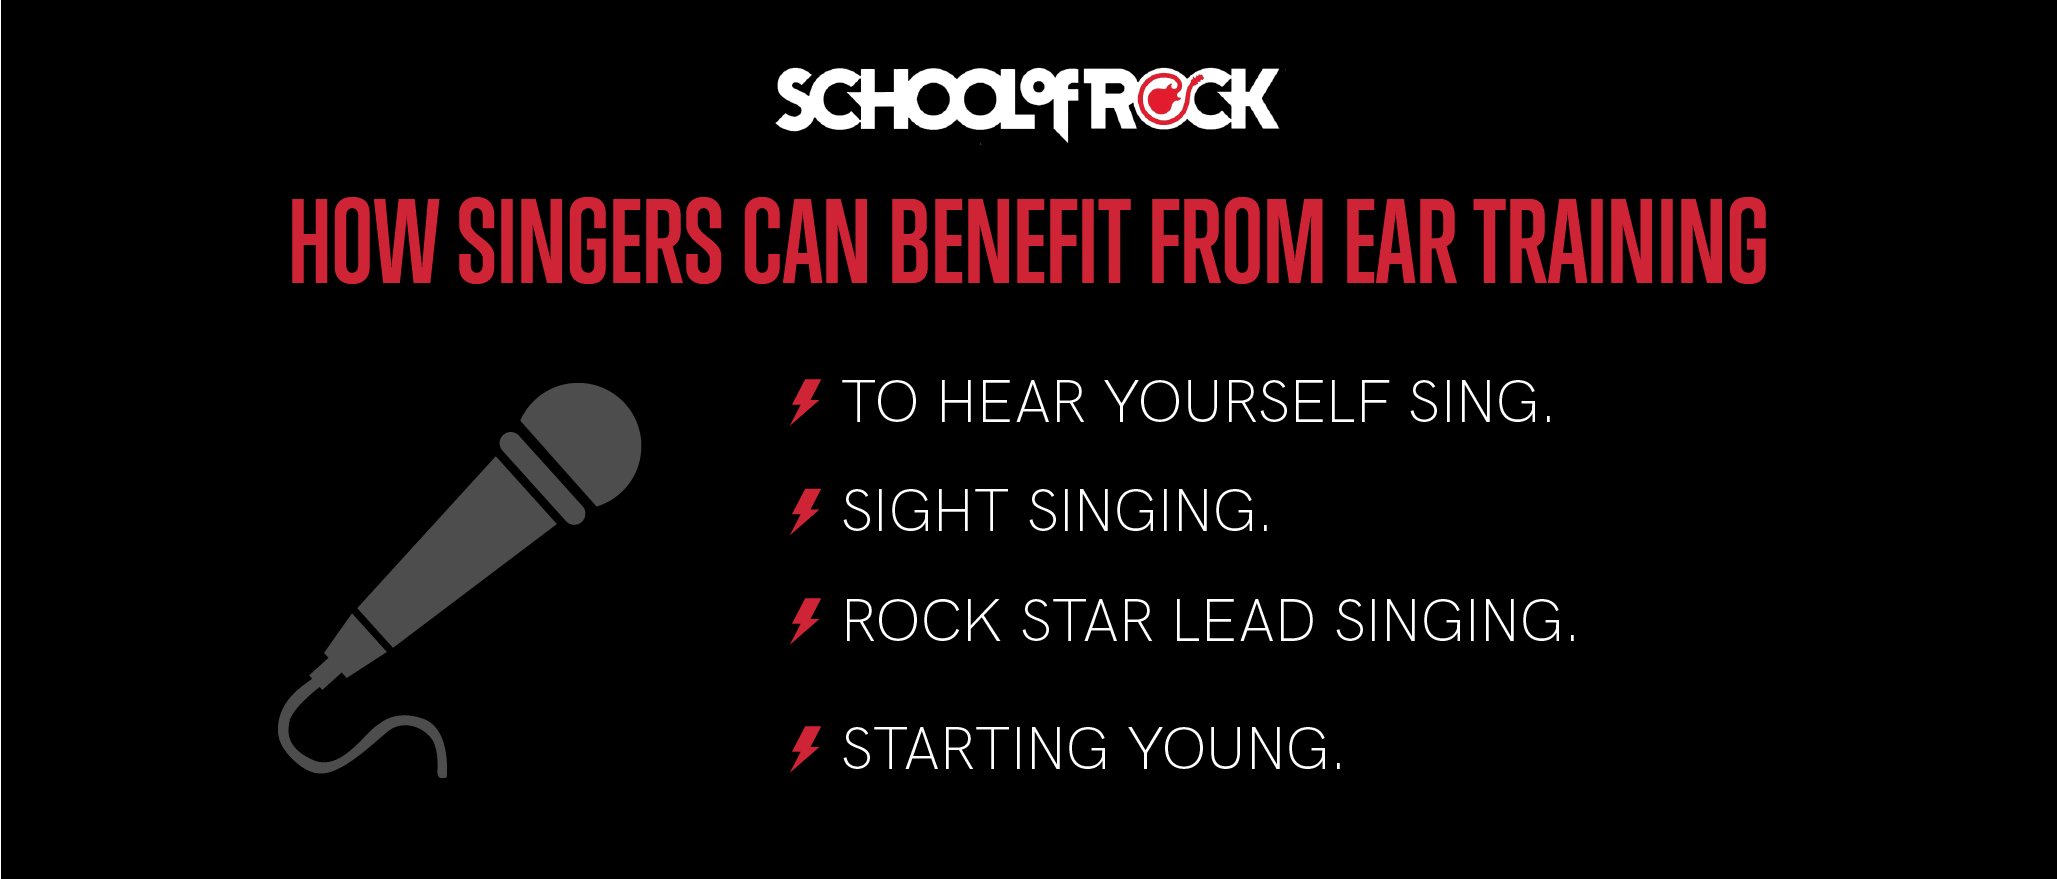 How singers can benefit from ear training: To hear yourself sing, sight singing, rock star lead singing, and starting young.